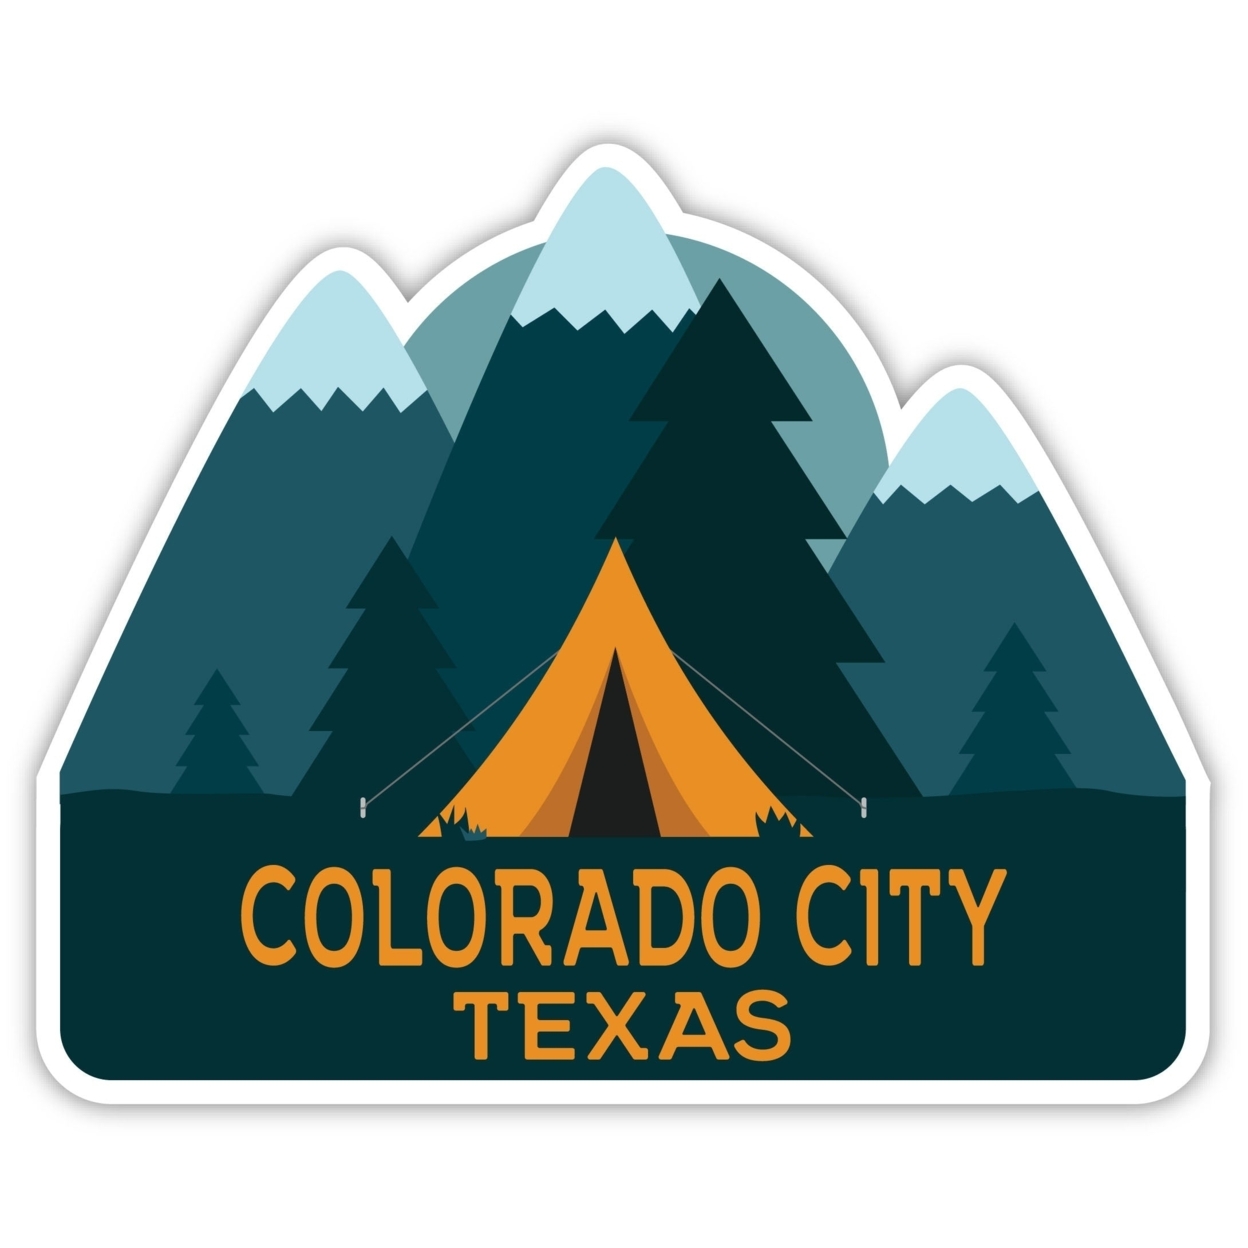 Colorado City Texas Souvenir Decorative Stickers (Choose Theme And Size) - 4-Pack, 8-Inch, Tent